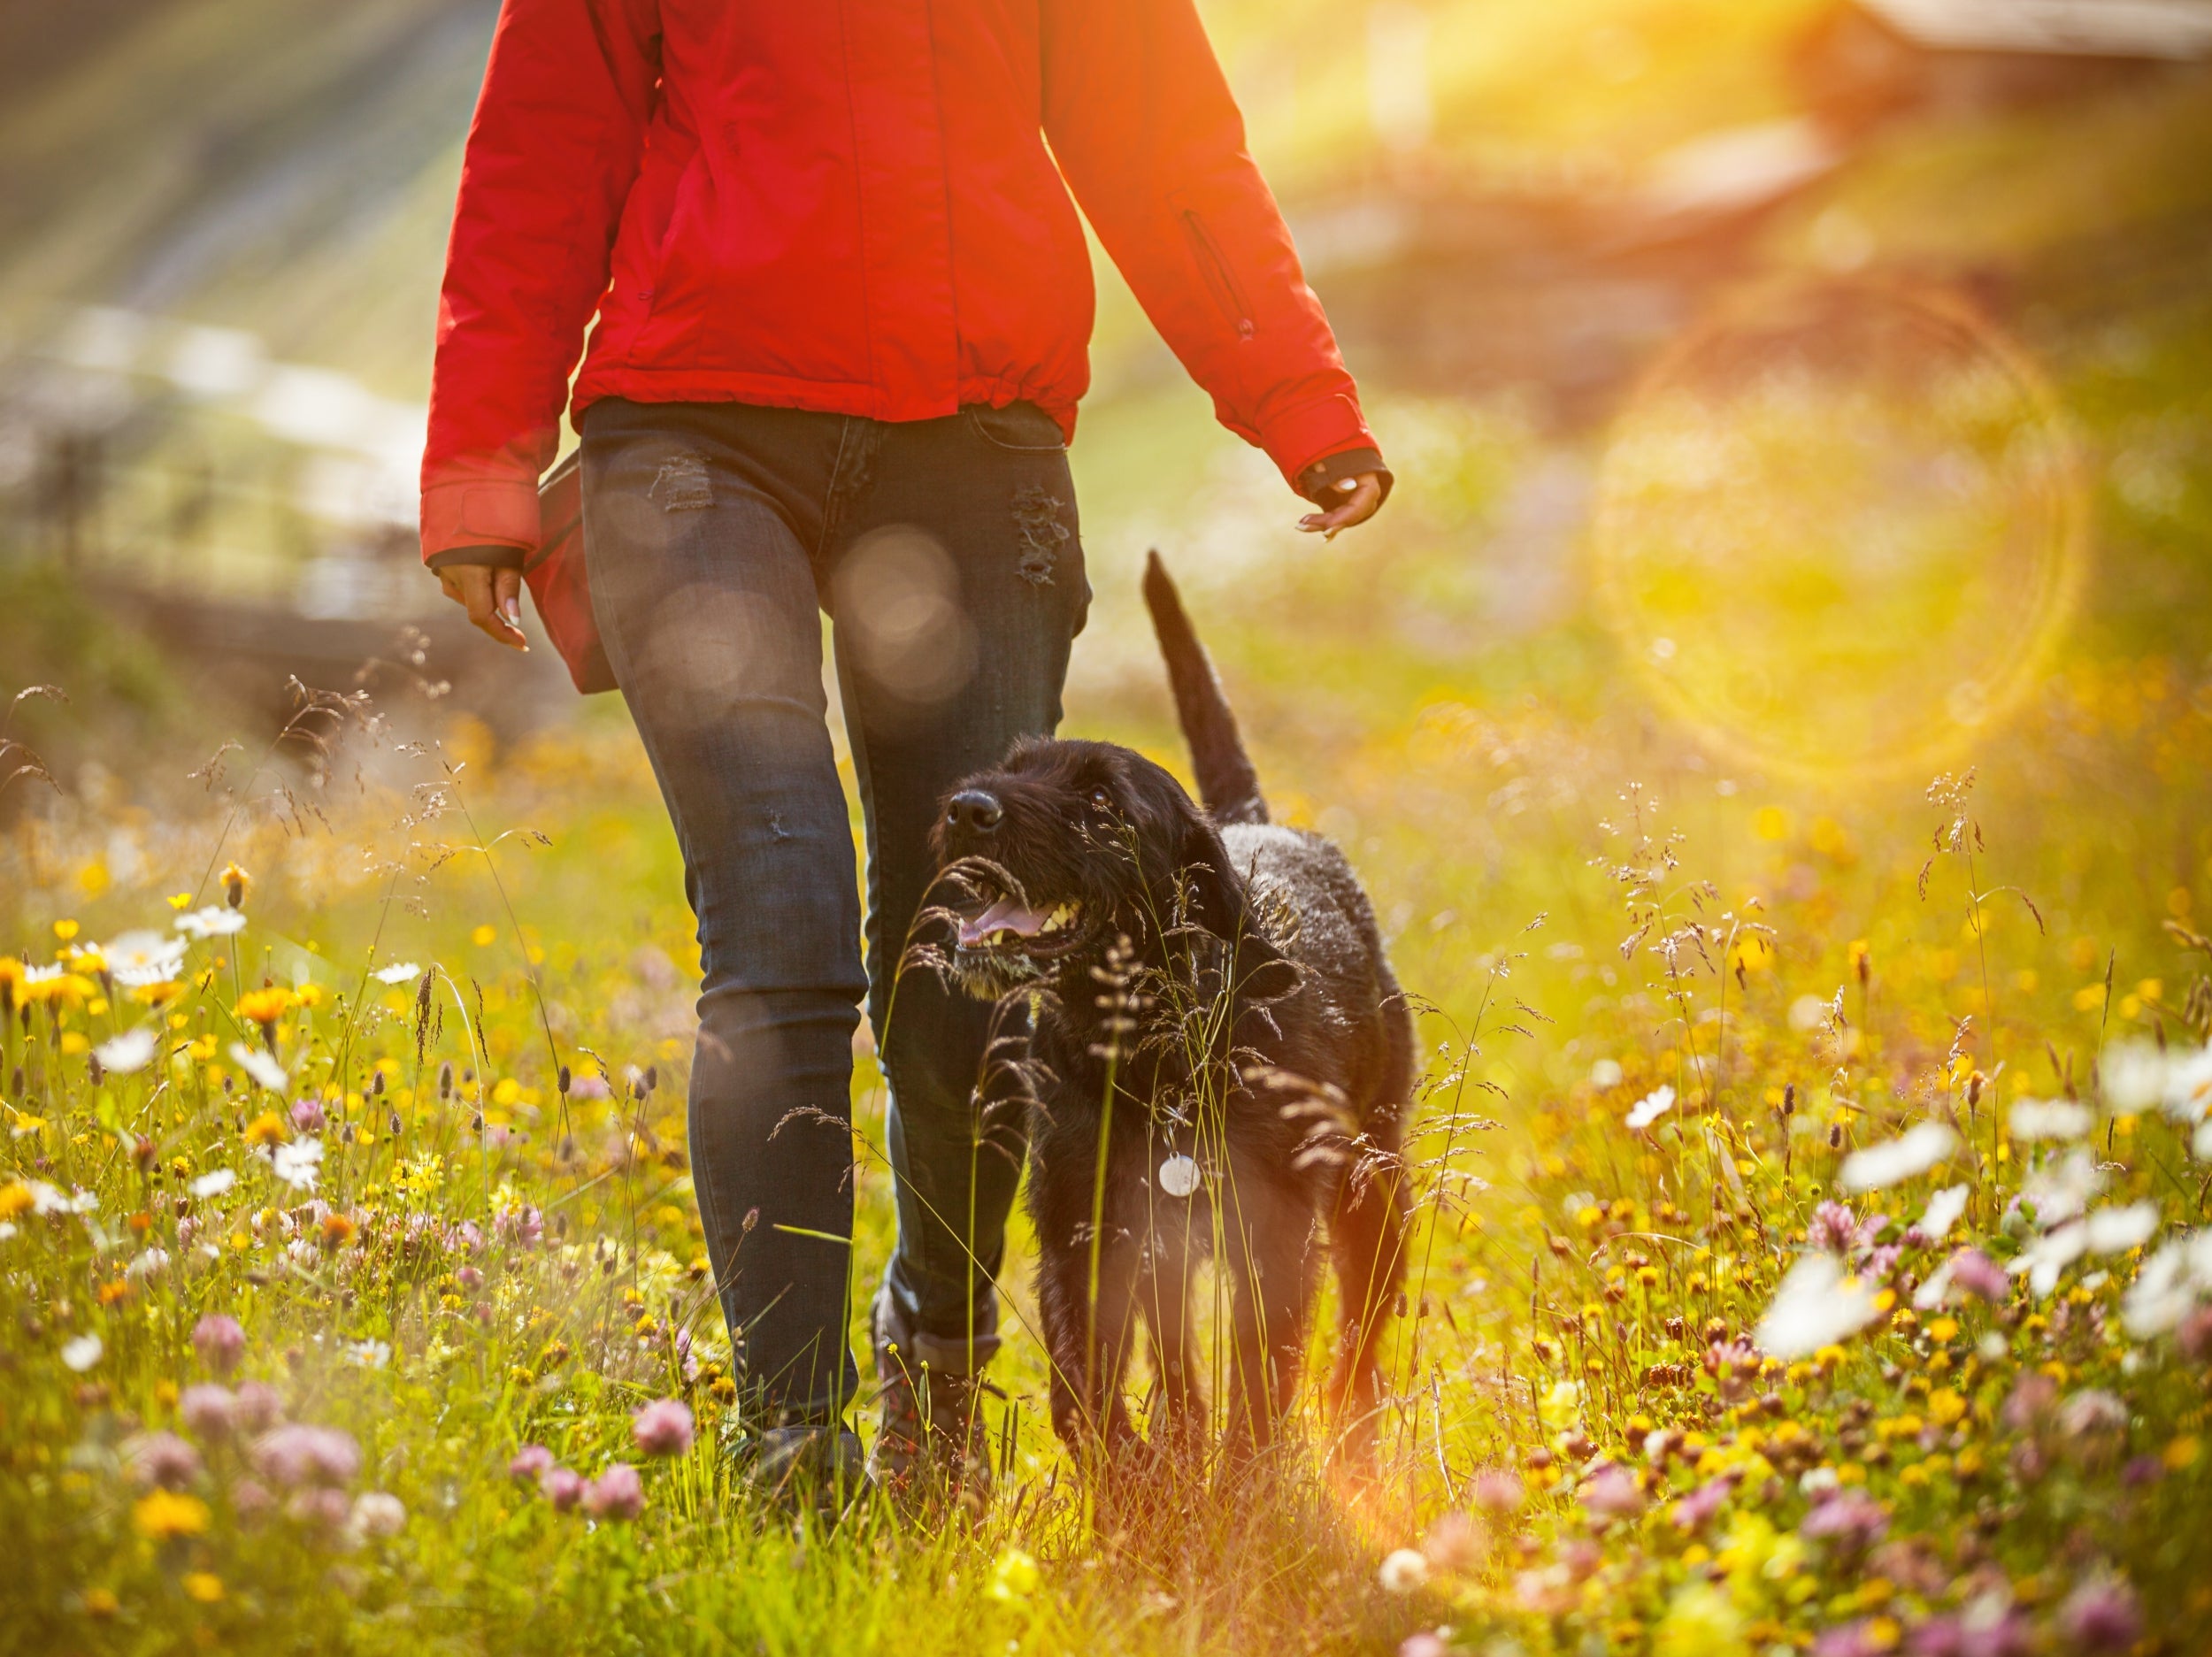 Make sure your dog gets as much exercise as they need